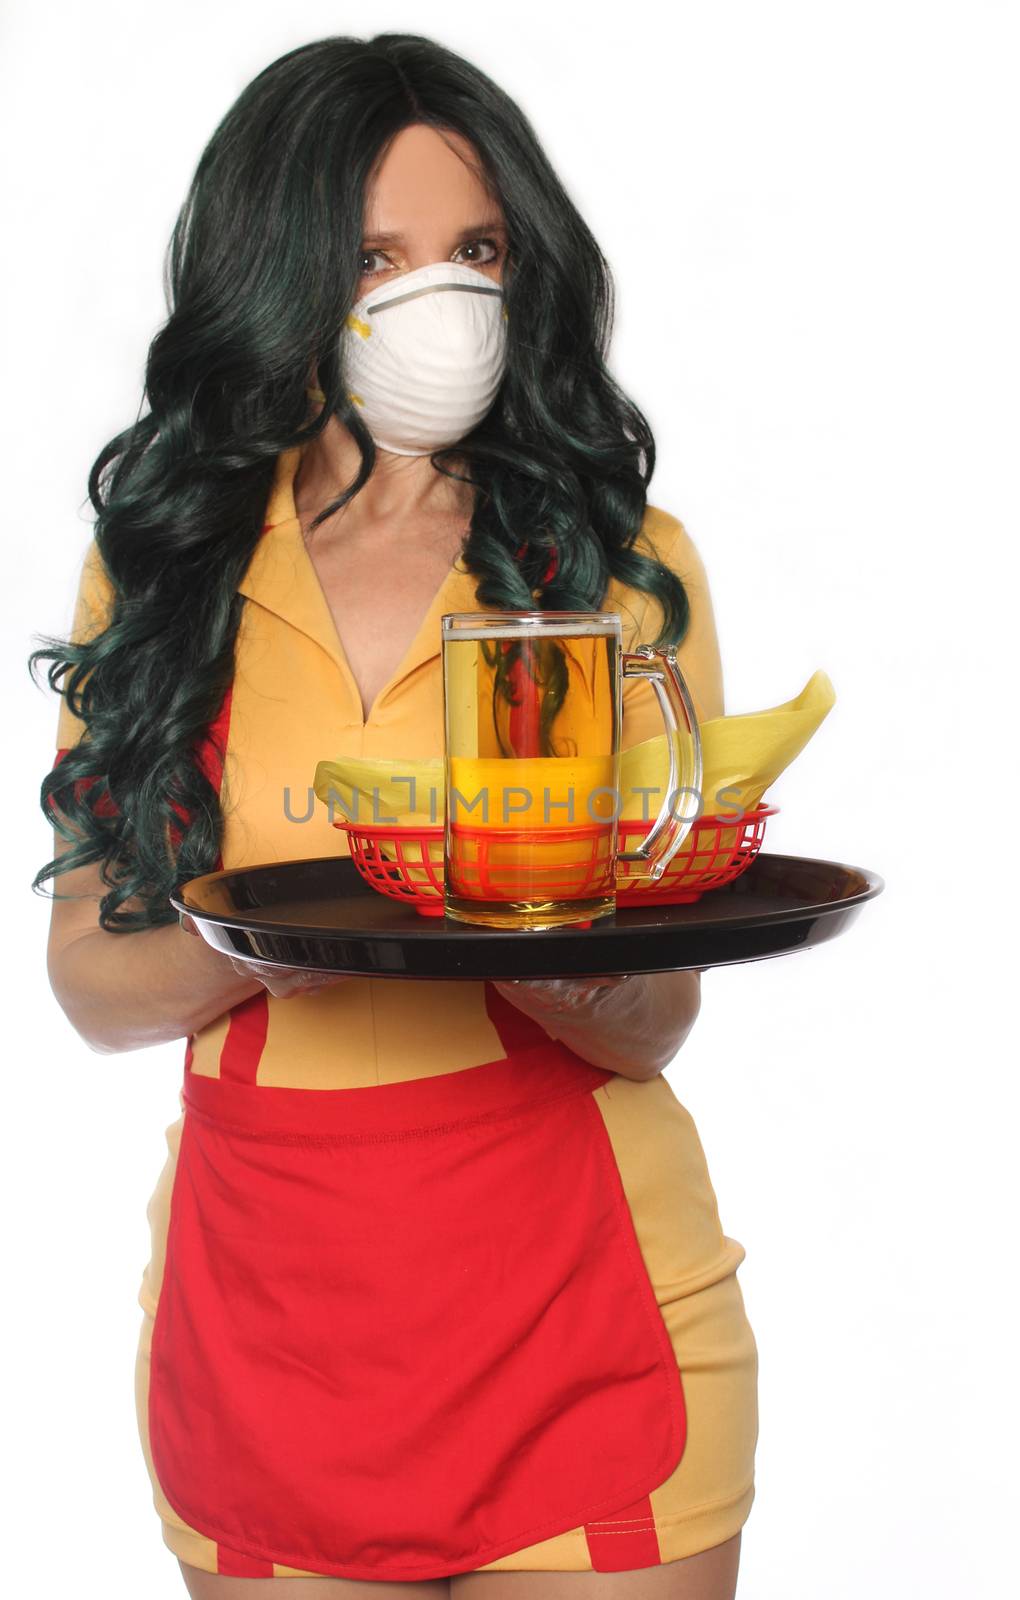 Restaurant and Bar Waitress Wearing Face Mask by Marti157900